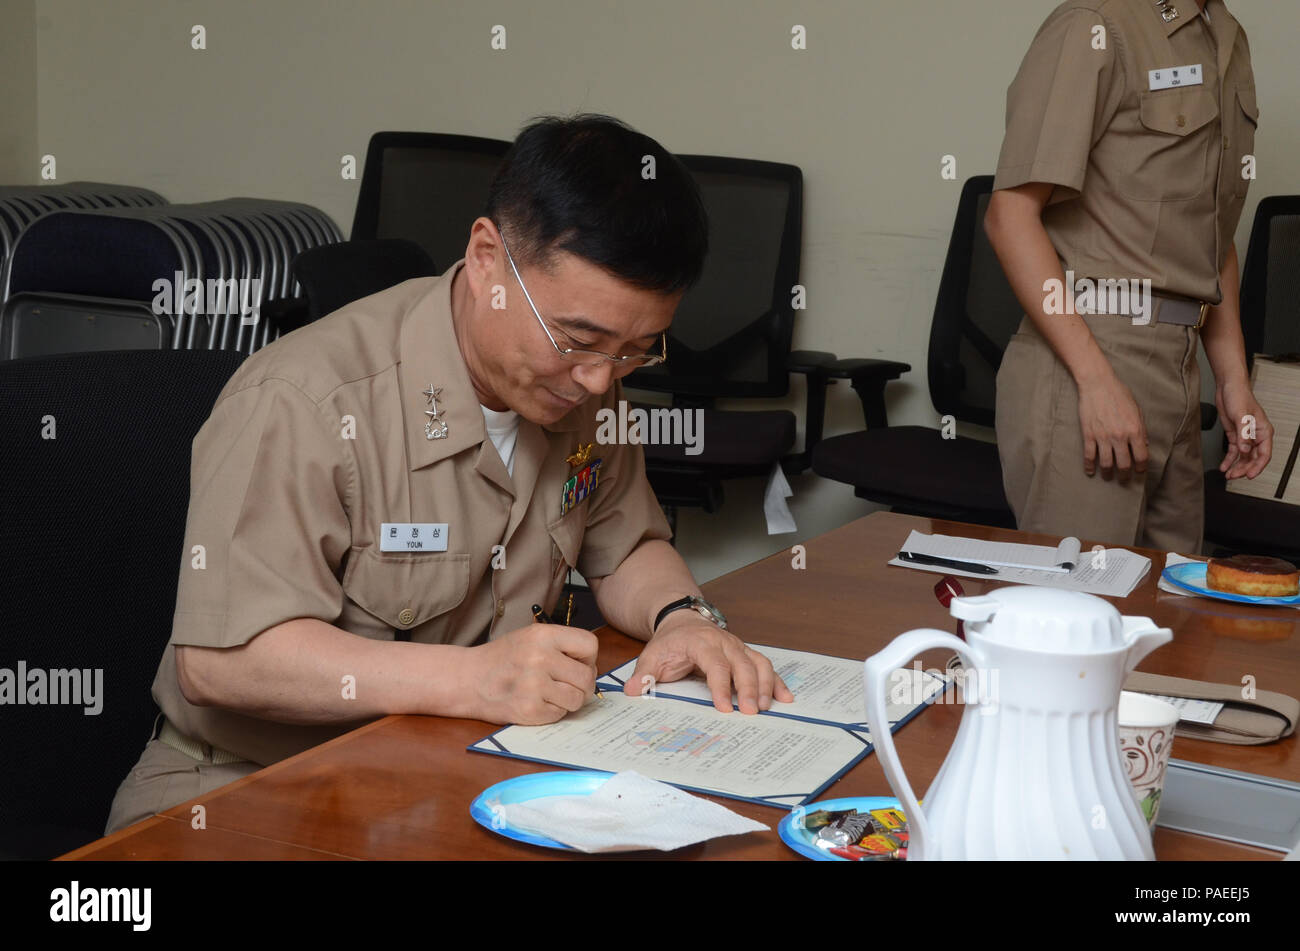 160331-N-YM720-260 SANTA RITA, Guam (March 31, 2016) Rear Adm. Youn Jeong Sang, commander, Submarine Force, Republic of Korea Navy (ROKN), signs a formal agreement at the conclusion of the 43rd Submarine Warfare Committee Meeting (SWCM) reaffirming the longstanding relationship between the U.S. and ROKN and pledging continued support between the two submarine forces. SWCM is a bilateral discussion between the U.S. and ROKN submarine forces designed to foster the partnership and focuses on submarine tactics, force integraton and future submarine development. (U.S. Navy photo by MC3 Allen McNair Stock Photo